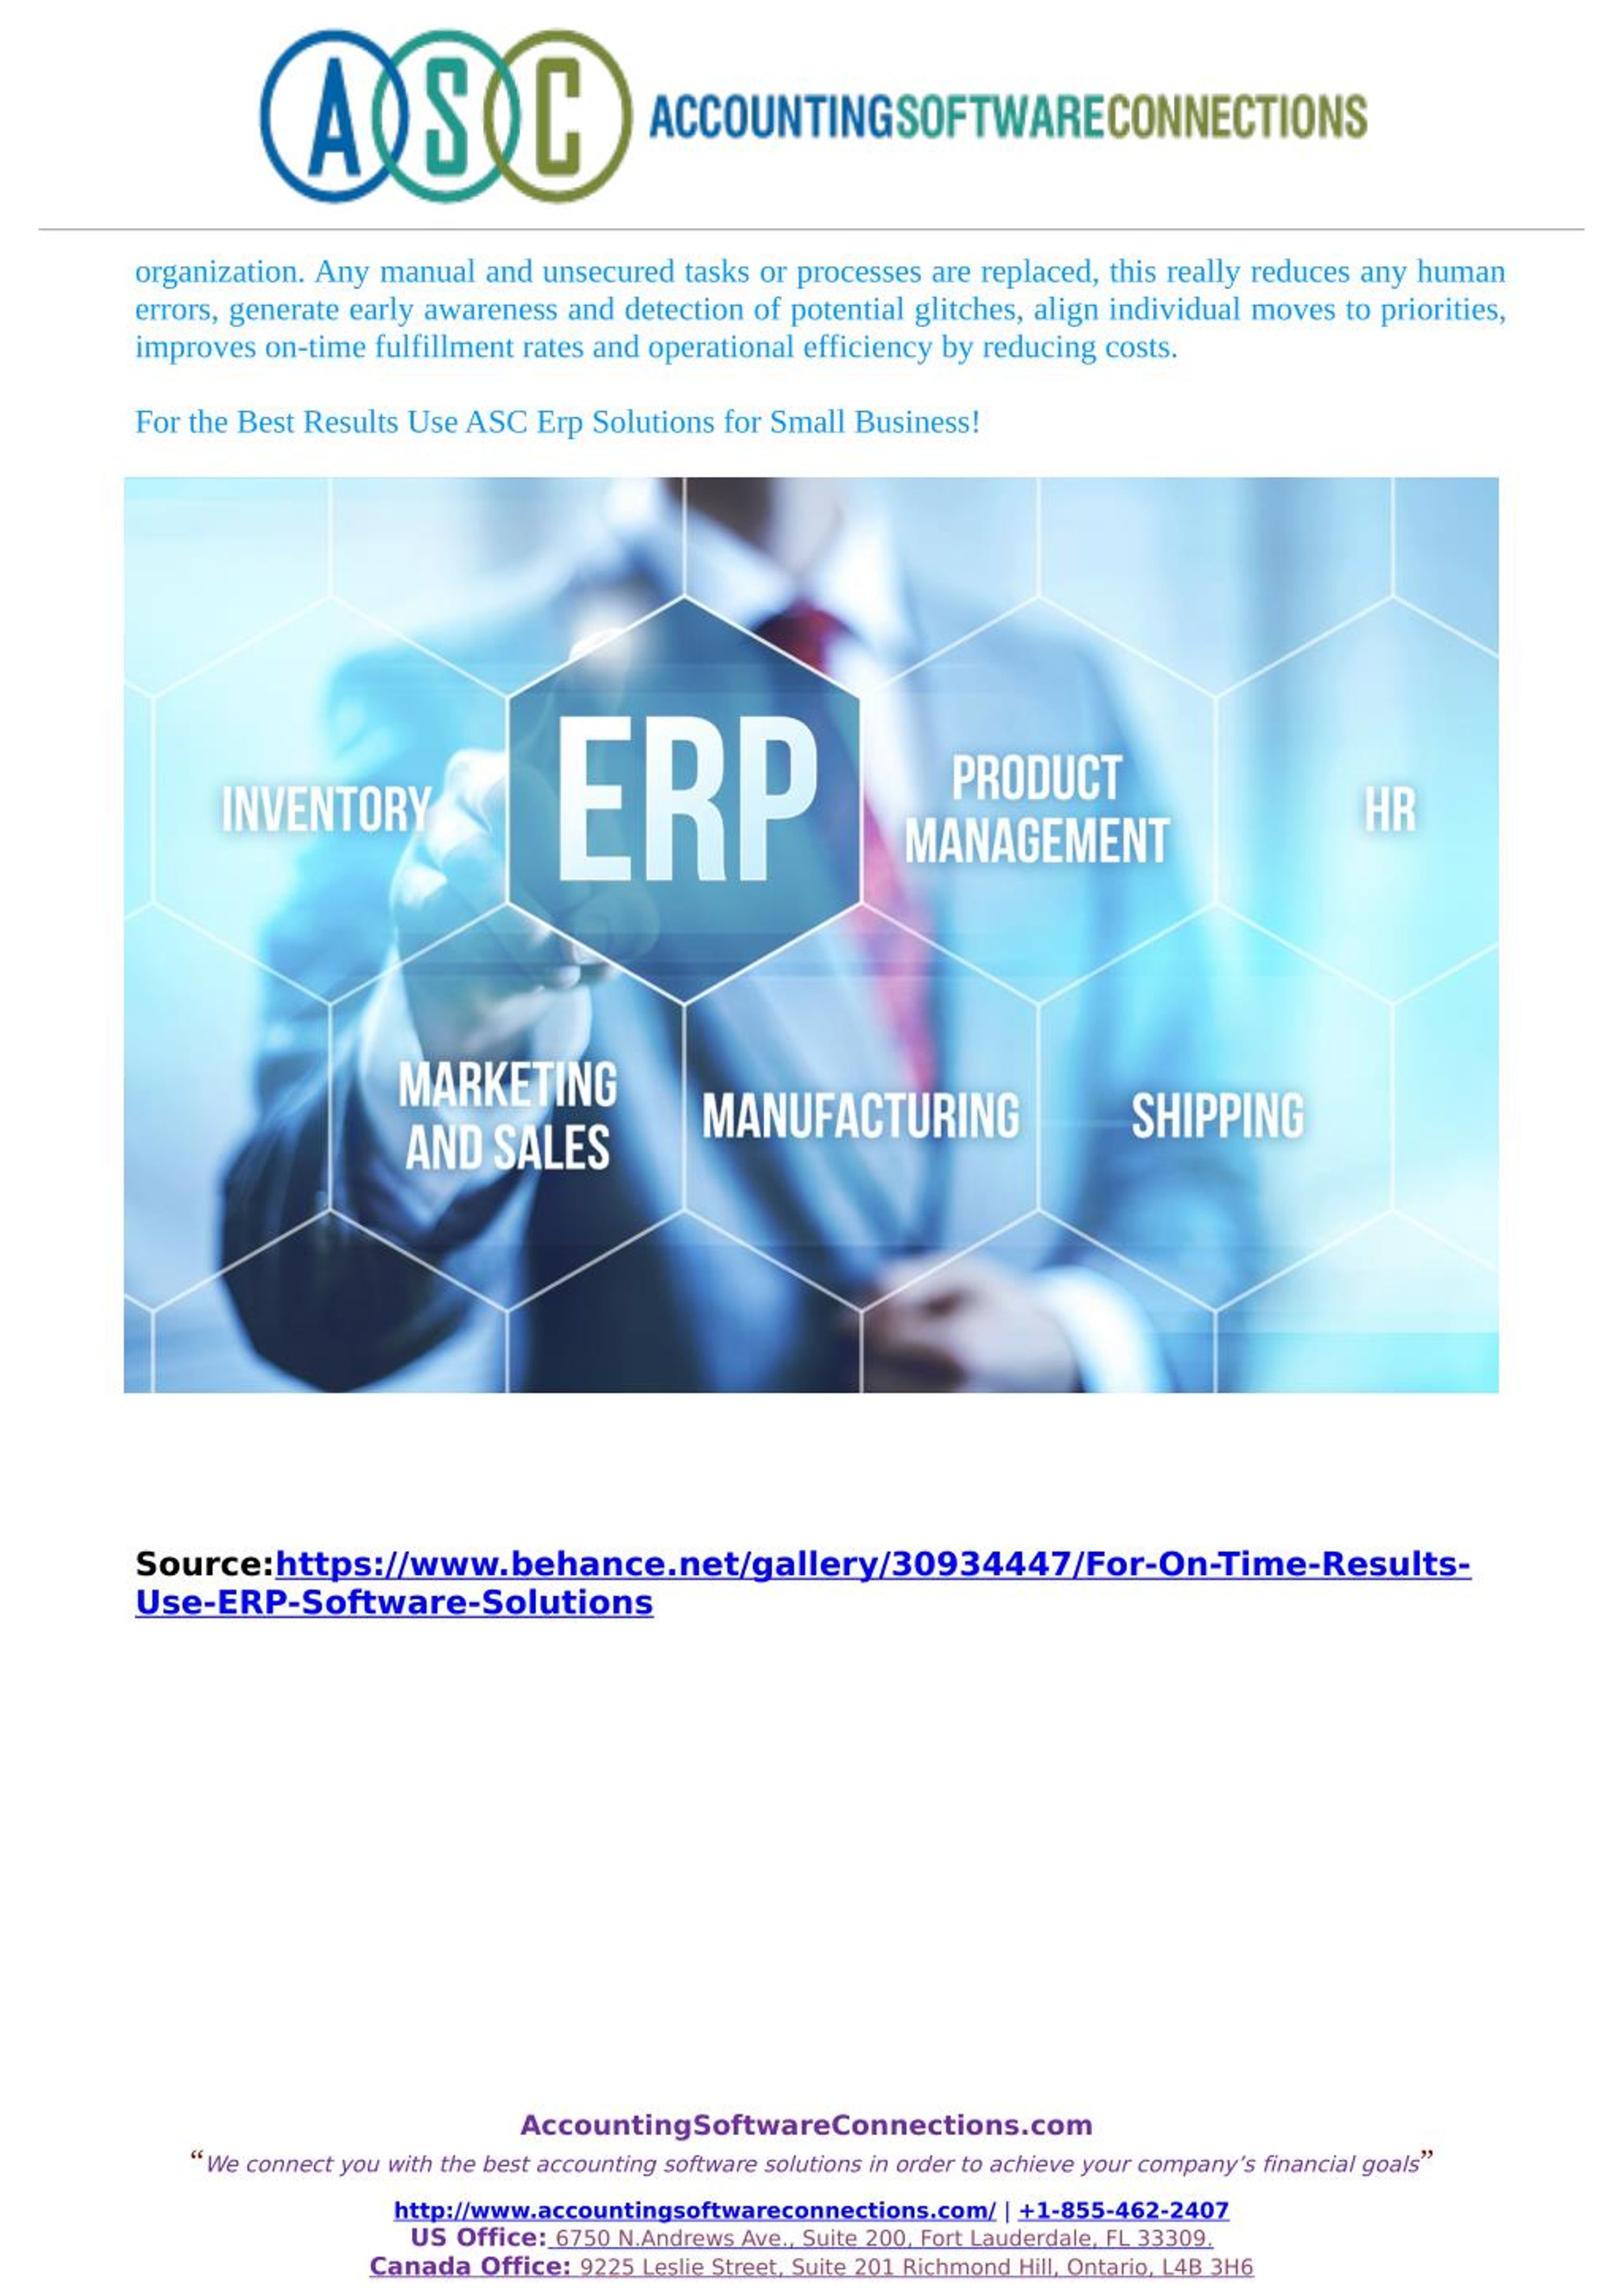 PPT - For Efficient On-Time Results Use ERP Software Solutions ...